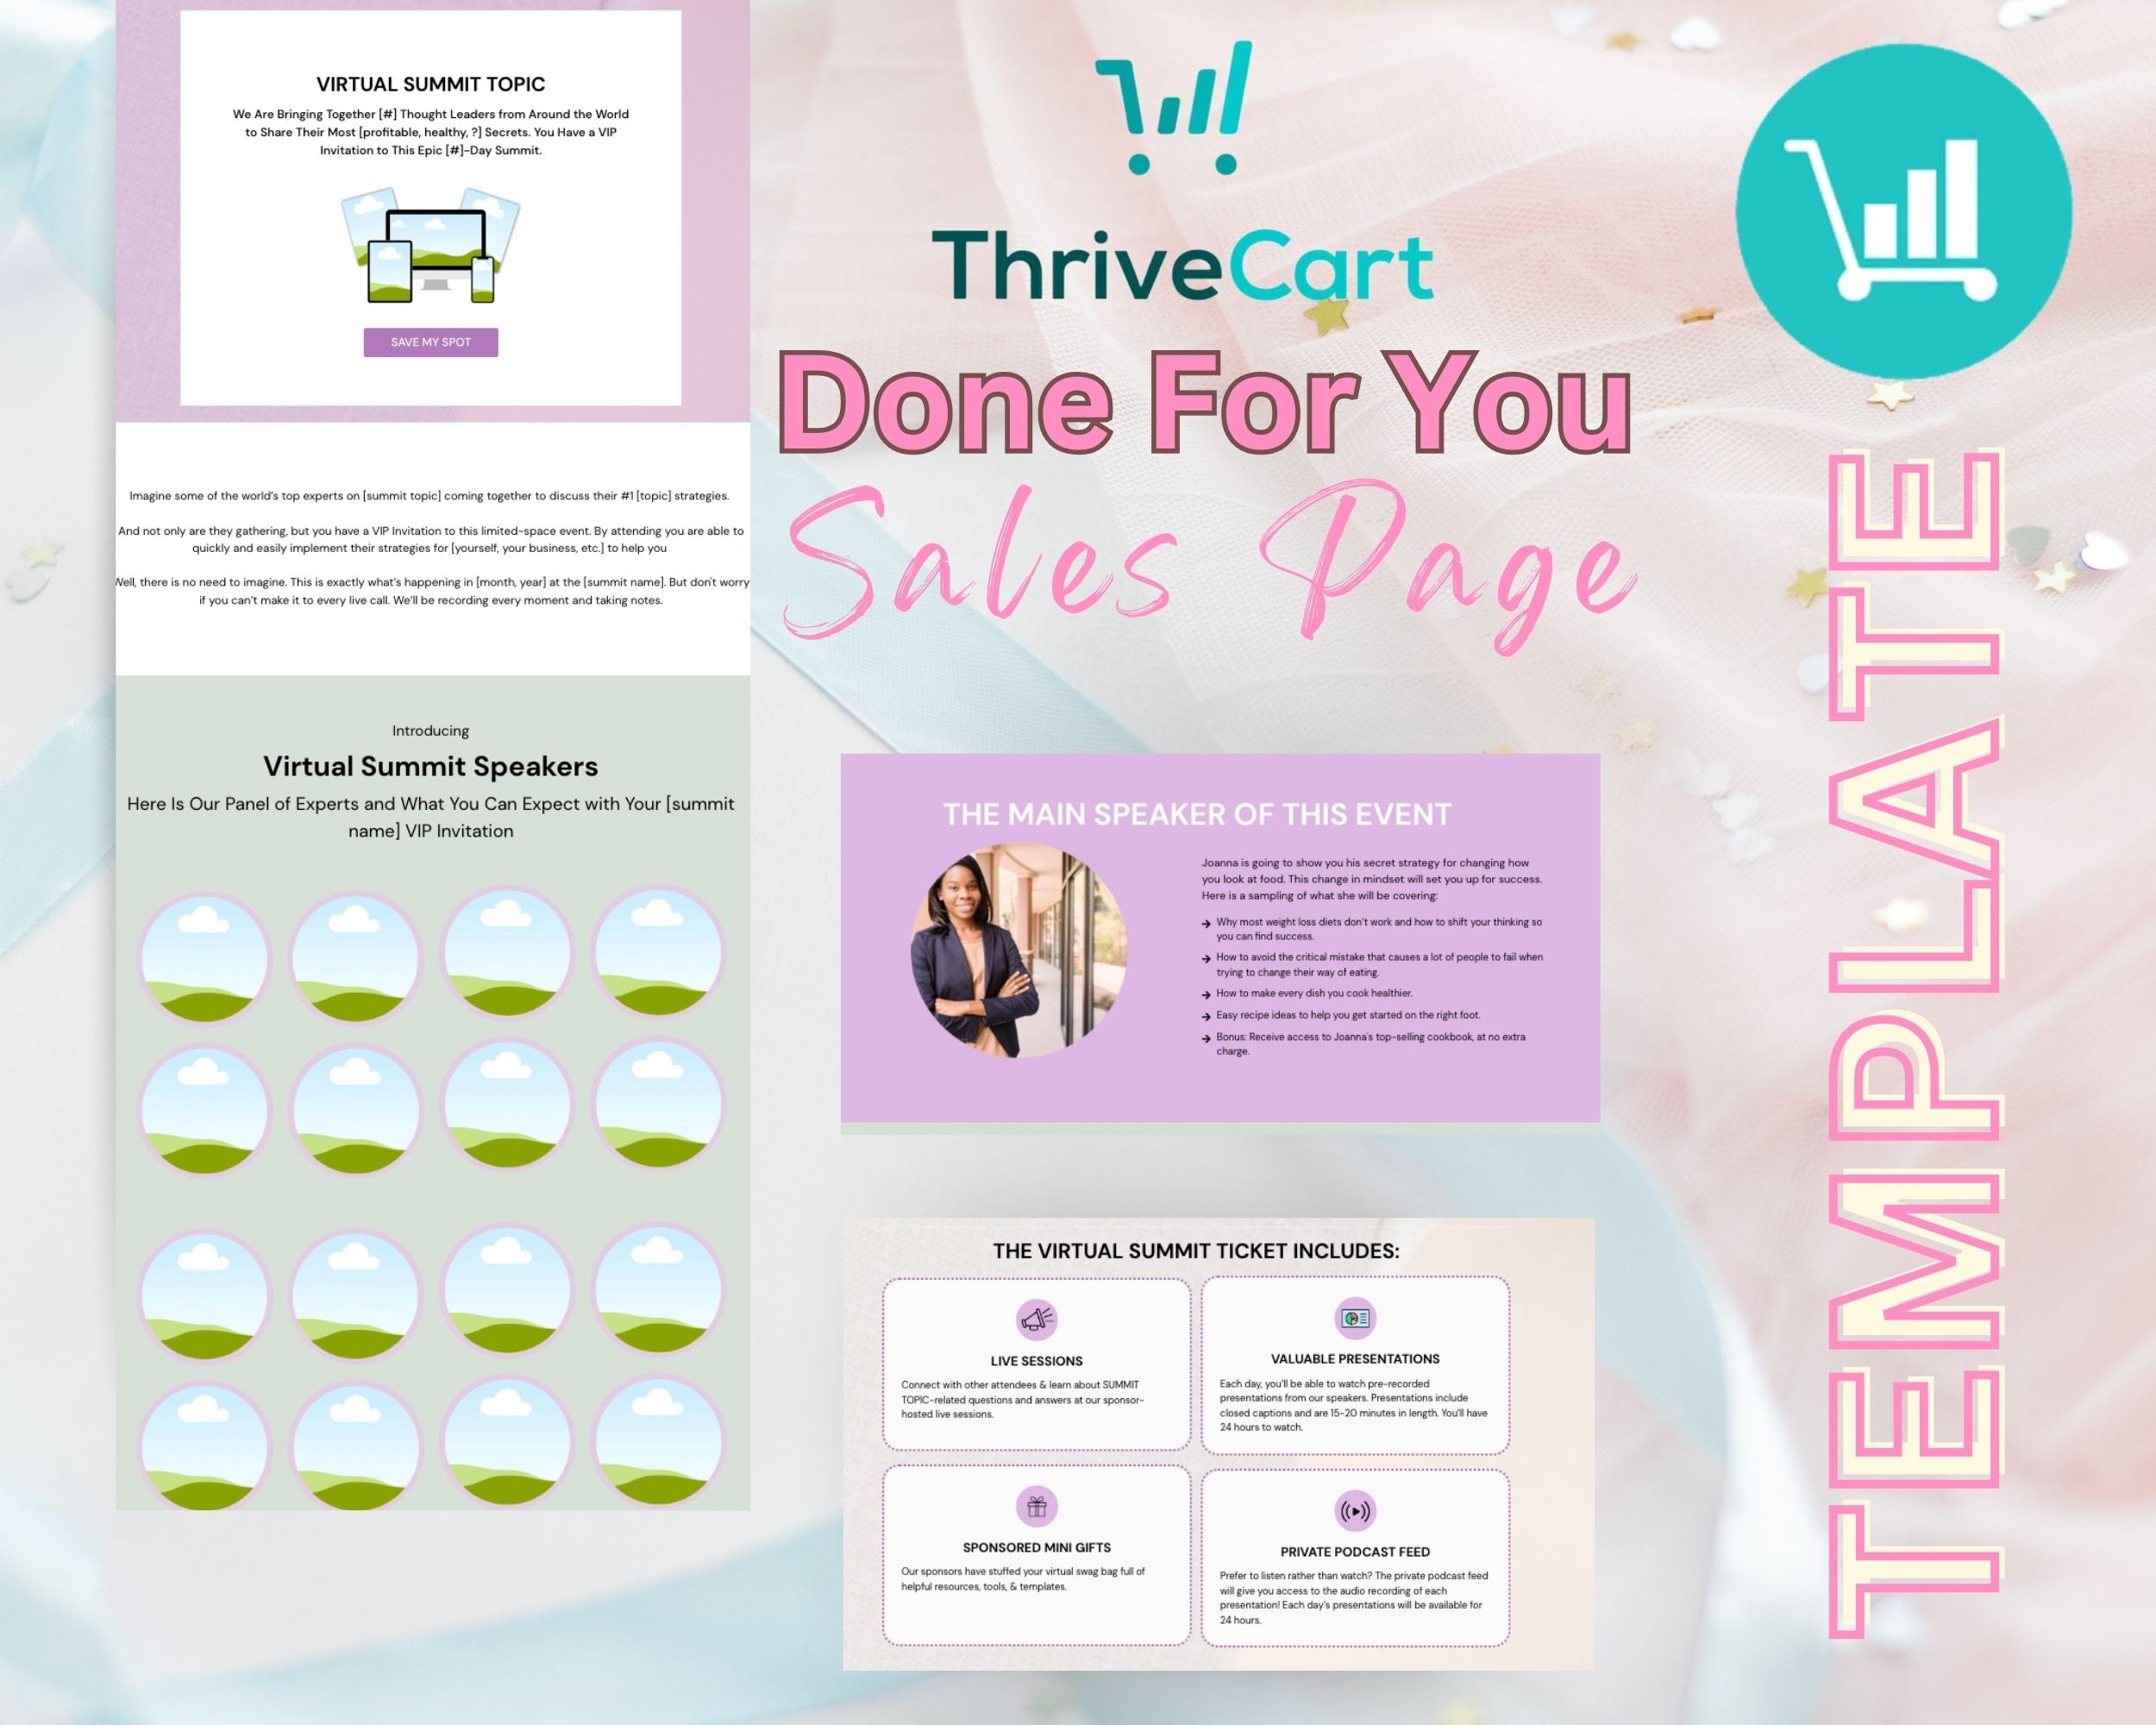 Virtual Summit Sales Page Template in ThriveCart